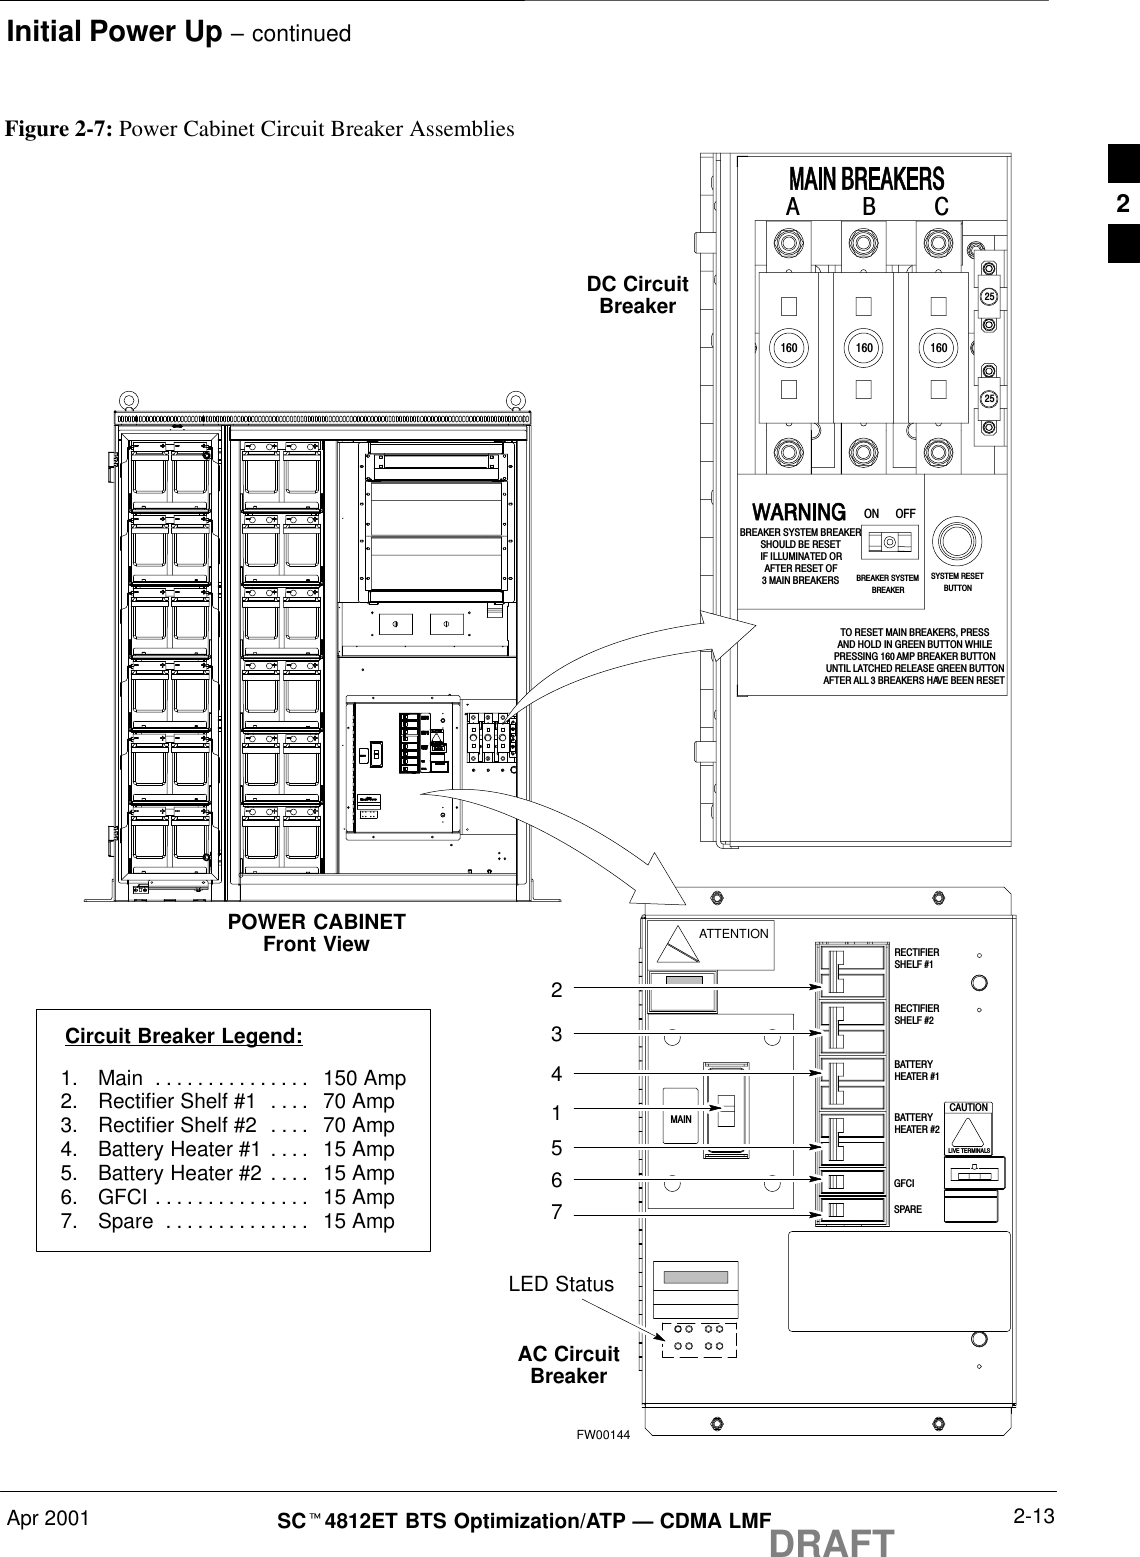 Initial Power Up – continuedApr 2001 2-13SCt4812ET BTS Optimization/ATP — CDMA LMFDRAFTLED StatusFigure 2-7: Power Cabinet Circuit Breaker AssembliesA B CBREAKER SYSTEM BREAKERSHOULD BE RESETIF ILLUMINATED ORAFTER RESET OF3 MAIN BREAKERSTO RESET MAIN BREAKERS, PRESSAND HOLD IN GREEN BUTTON WHILEPRESSING 160 AMP BREAKER BUTTONUNTIL LATCHED RELEASE GREEN BUTTONAFTER ALL 3 BREAKERS HAVE BEEN RESETON OFFBREAKER SYSTEMBREAKERSYSTEM RESETBUTTONFW00144POWER CABINETFront ViewAC CircuitBreakerDC CircuitBreaker160 160 1602525Circuit Breaker Legend:1. Main 150 Amp. . . . . . . . . . . . . . . 2. Rectifier Shelf #1 70 Amp. . . . 3. Rectifier Shelf #2 70 Amp. . . . 4. Battery Heater #1 15 Amp. . . . 5. Battery Heater #2 15 Amp. . . . 6. GFCI 15 Amp. . . . . . . . . . . . . . . 7. Spare 15 Amp. . . . . . . . . . . . . . RECTIFIERSHELF #1RECTIFIERSHELF #2BATTERYHEATER #1GFCISPAREBATTERYHEATER #2CAUTIONLIVE TERMINALS2345617ATTENTIONMAIN2